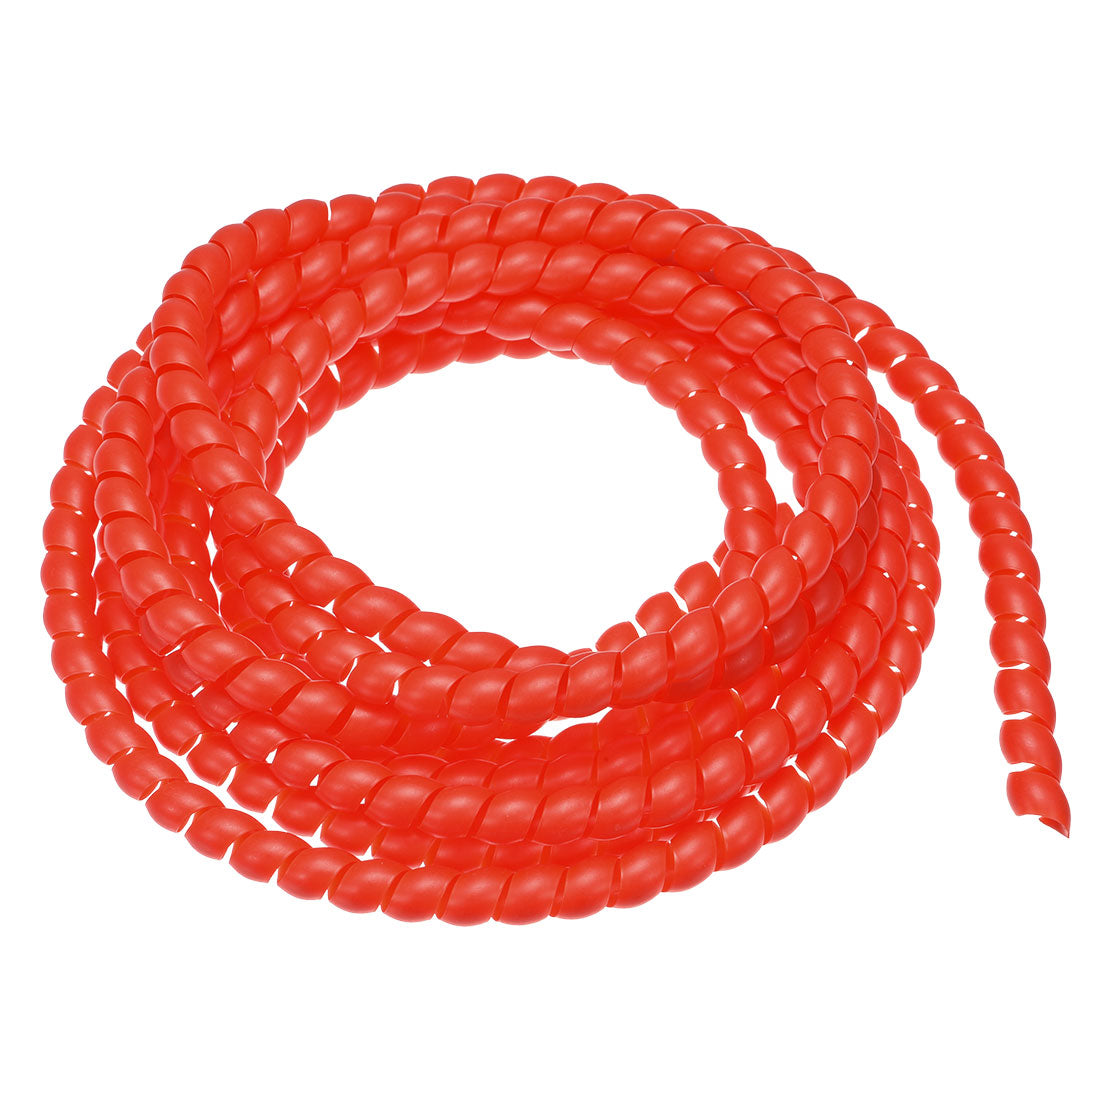 uxcell Uxcell Flexible Spiral Tube Wrap Cable Management Sleeve 10mm x 12mm Computer Wire Manage Cord 3 Meters Length Red